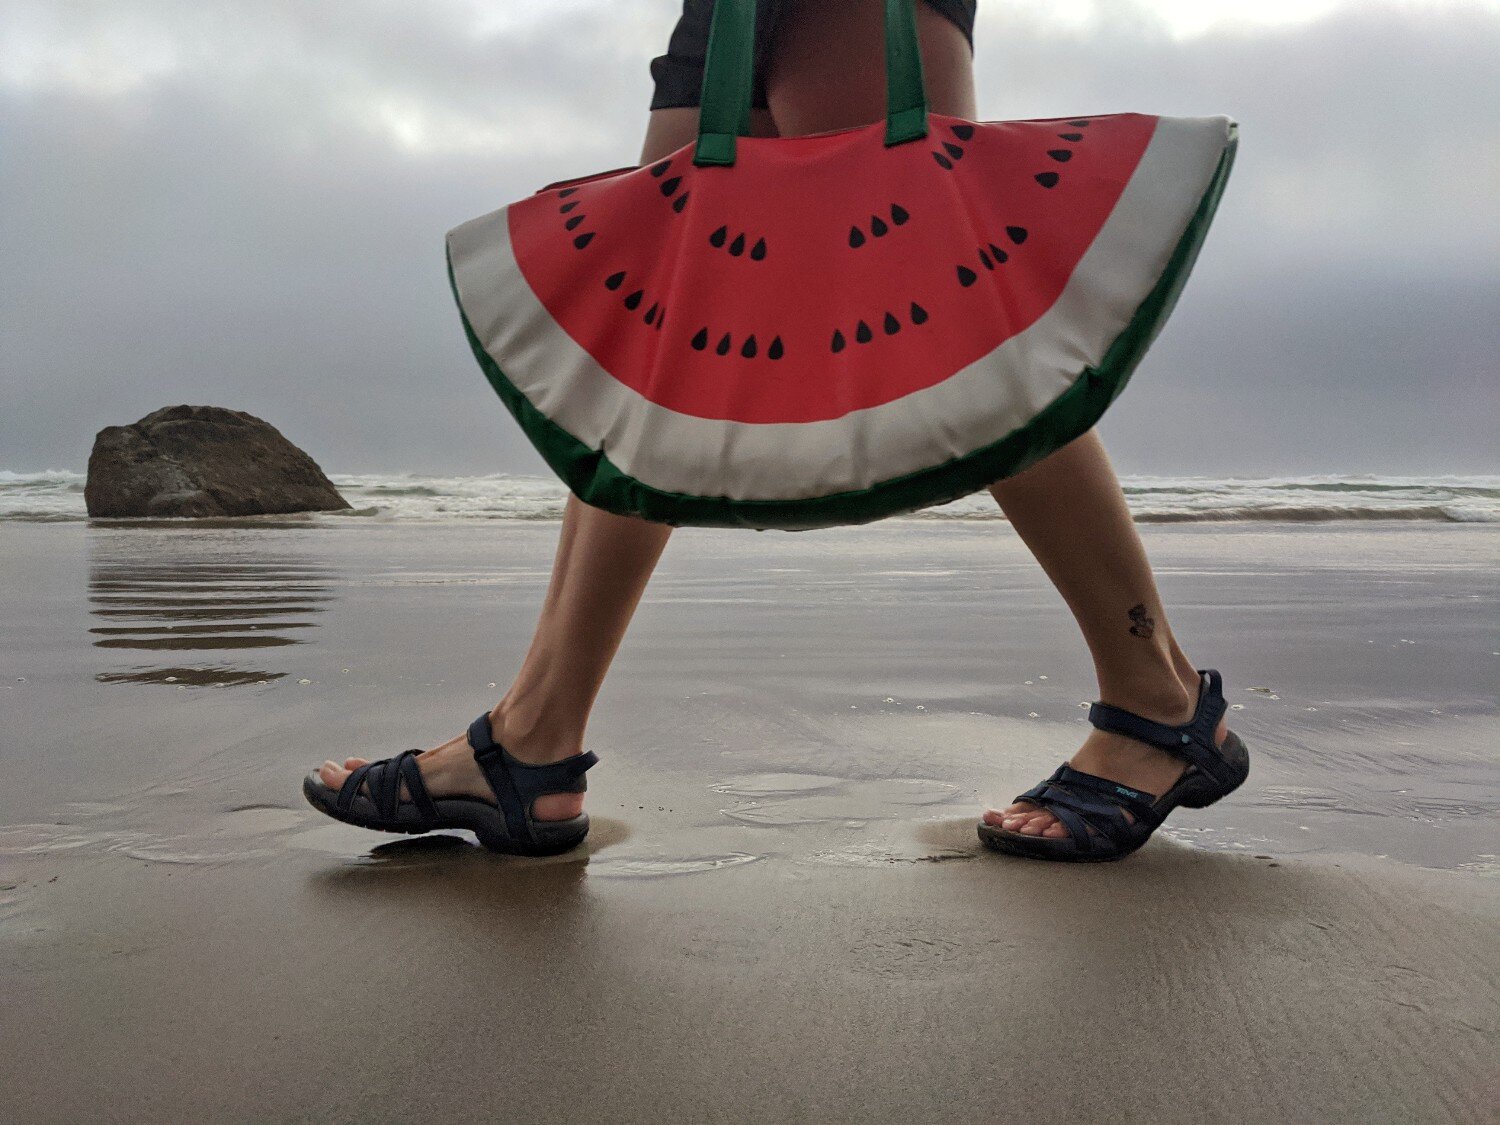 The stylish Teva Tirras work equally well for casual beach trips and backcountry adventures.